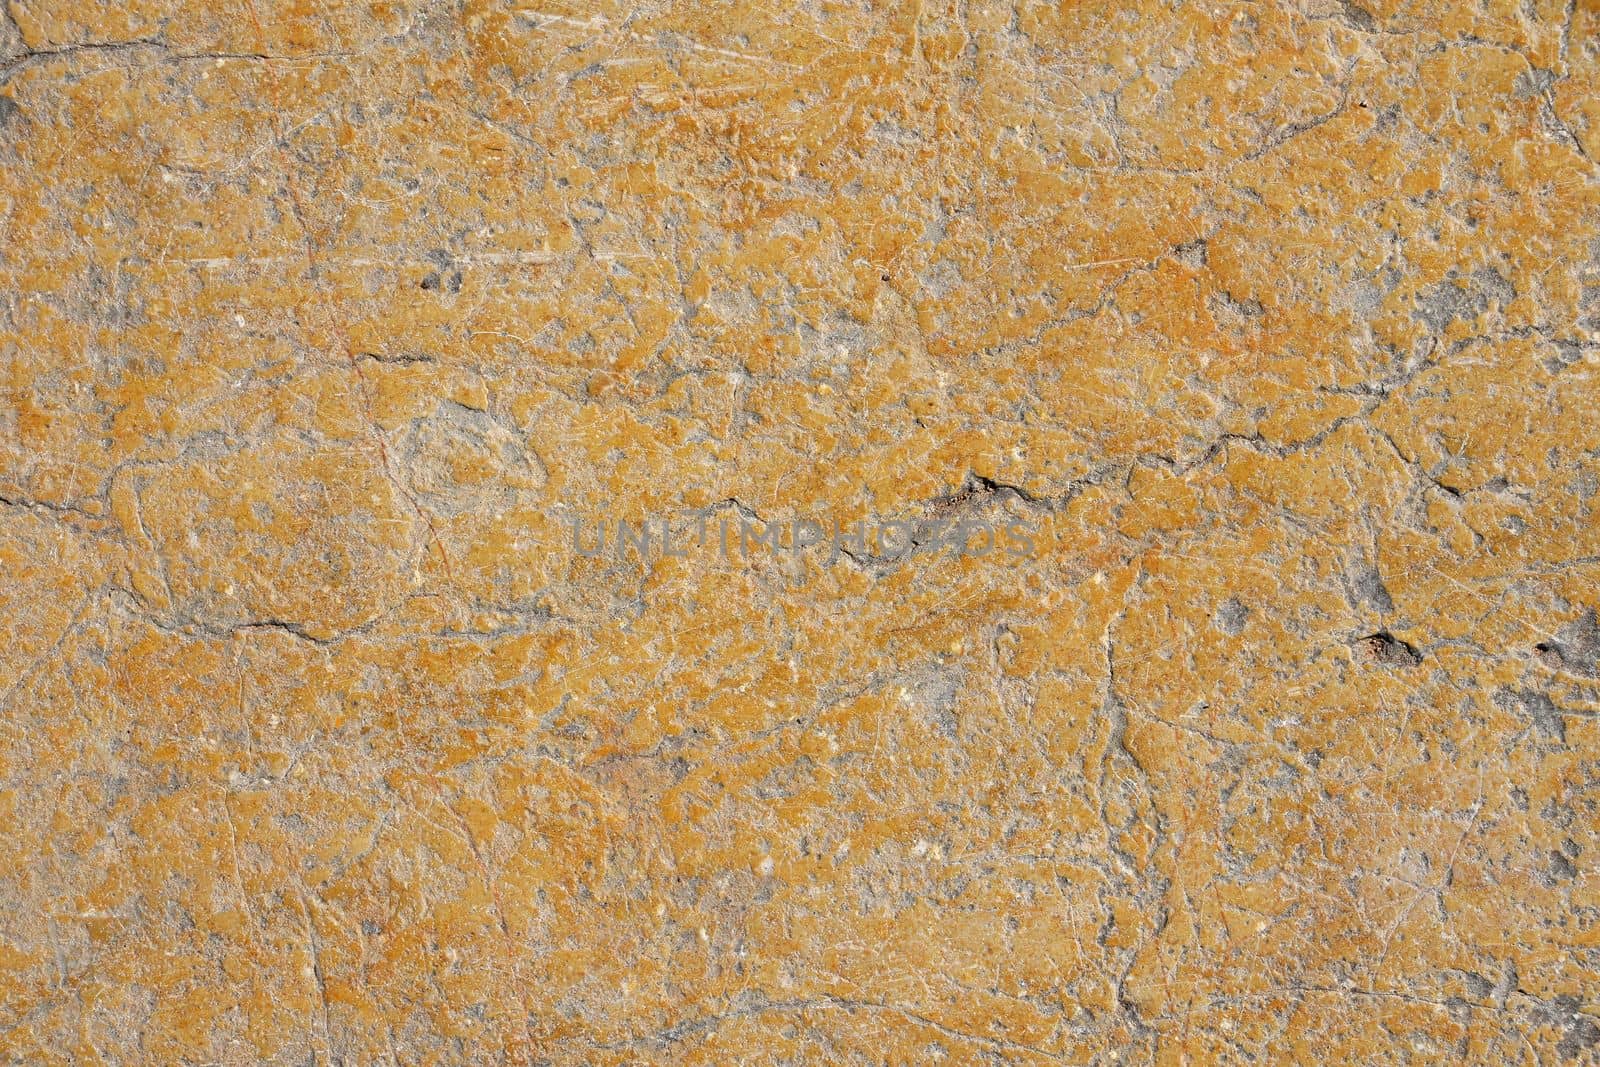 Grunge yellow orange brown old painted concrete or stone wall background texture with stains of faded paint peel and scaling, uneven and weathered